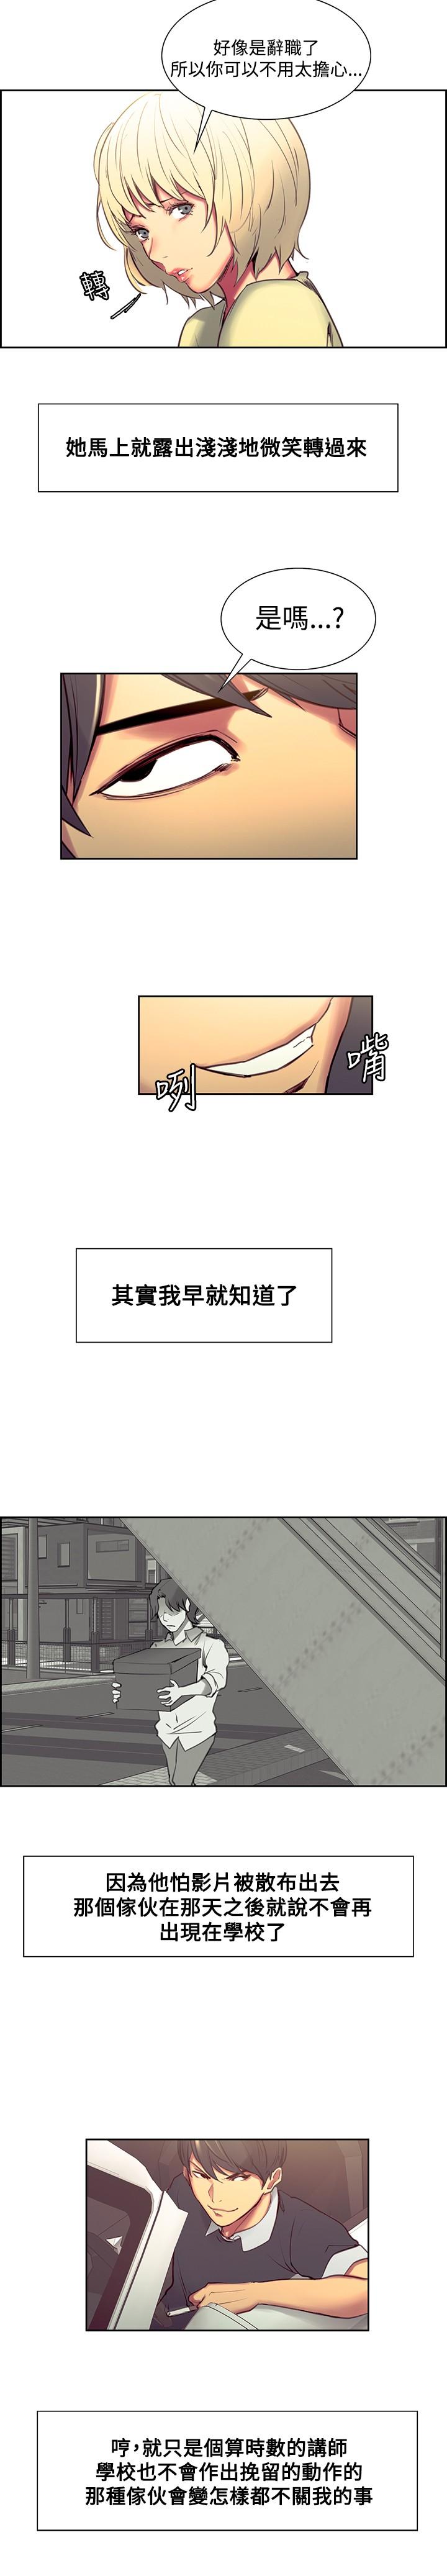 [Serious] Domesticate the Housekeeper 调教家政妇 Ch.29~44END [Chinese]中文 31